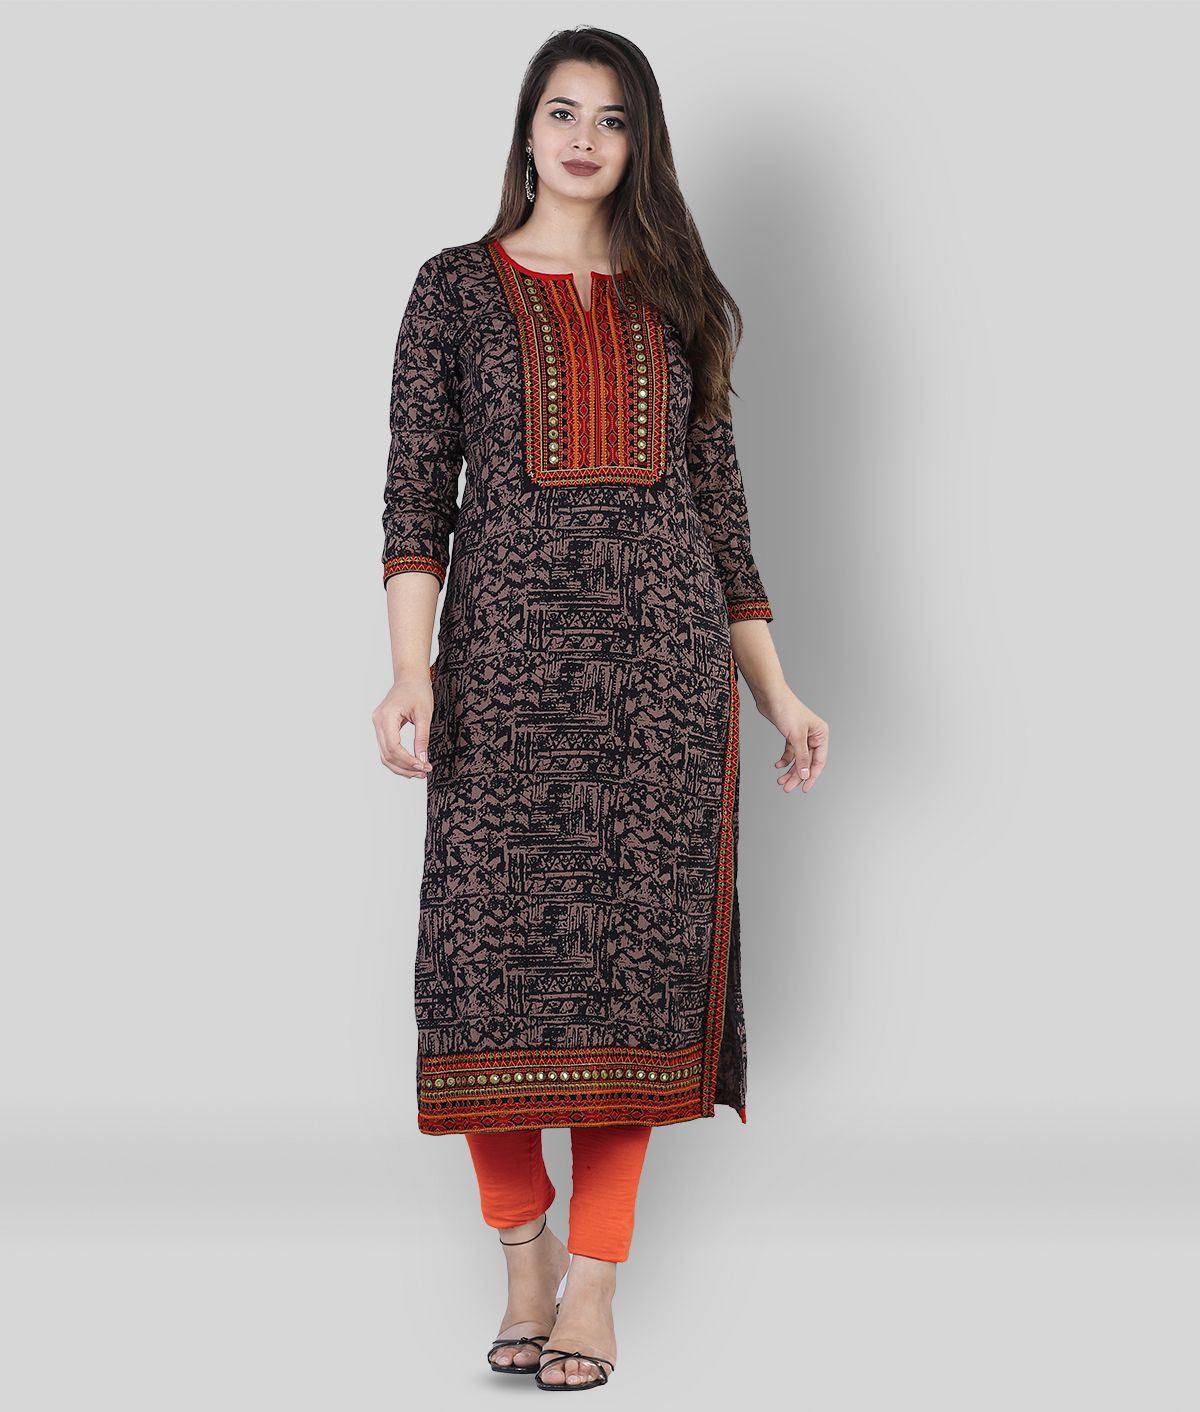 NYPA - Multicolor Rayon Women's Straight Kurti ( Pack of 1 )